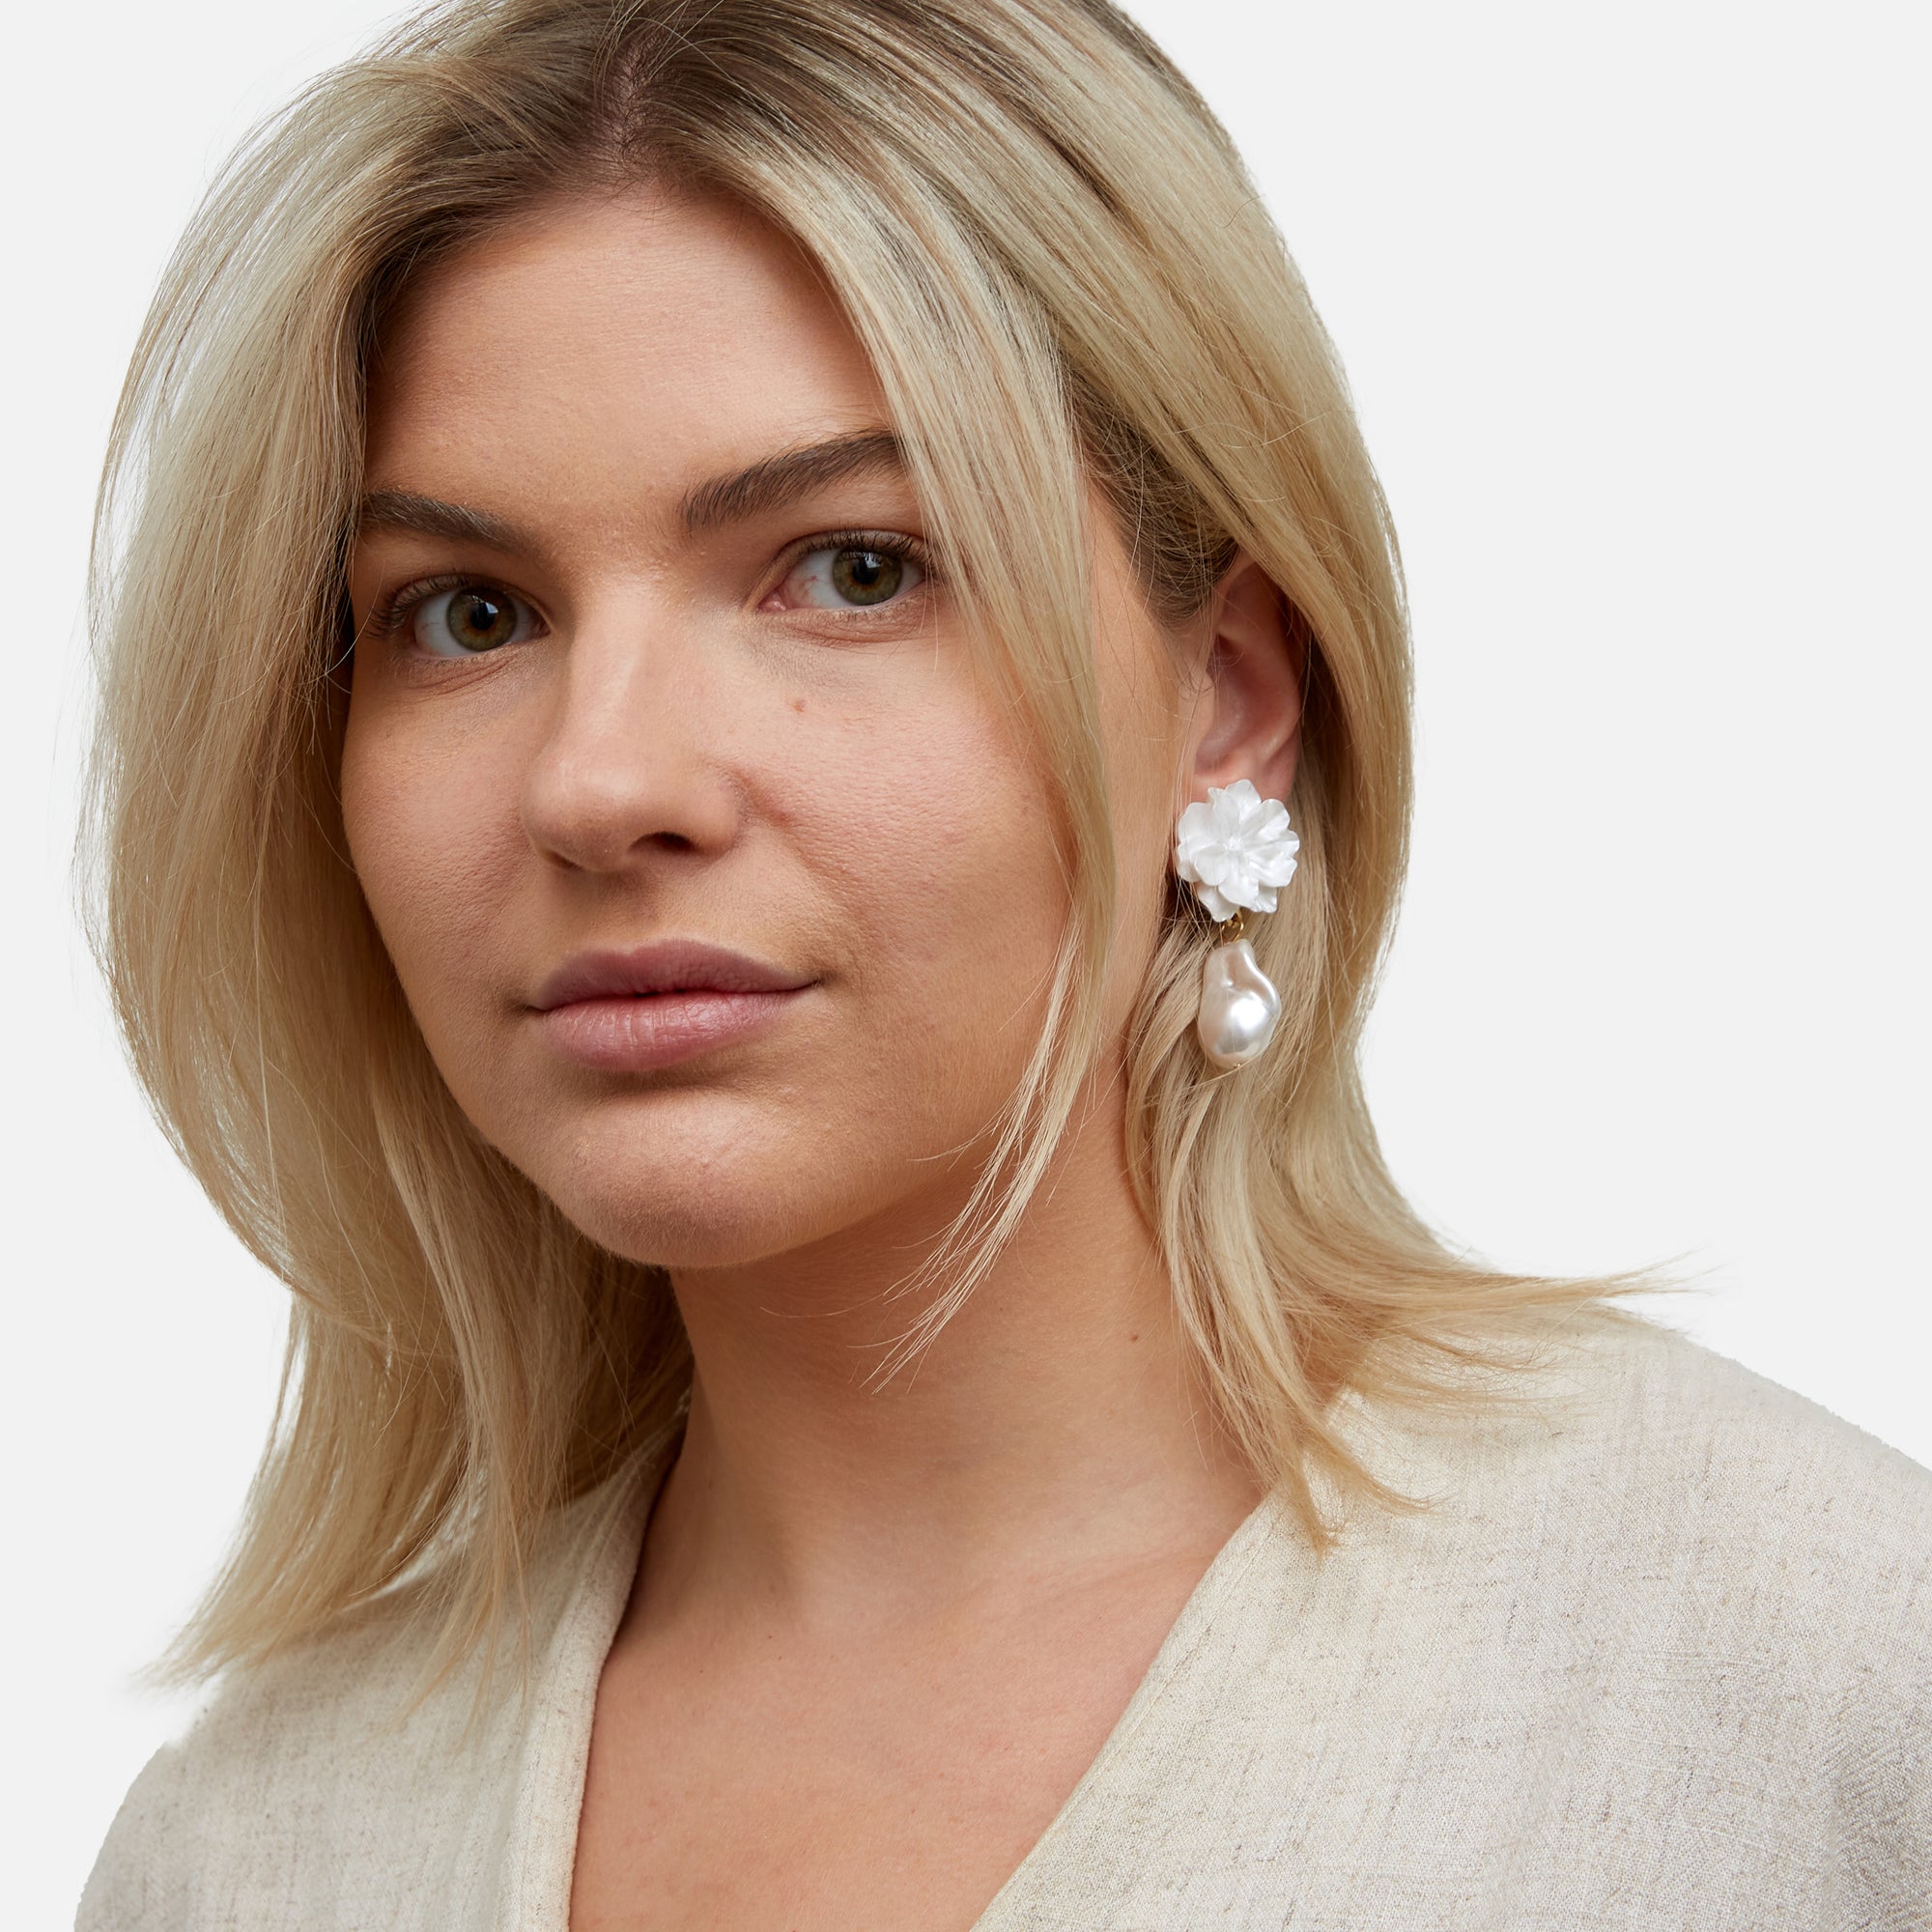 White earrings with pearls and flowers